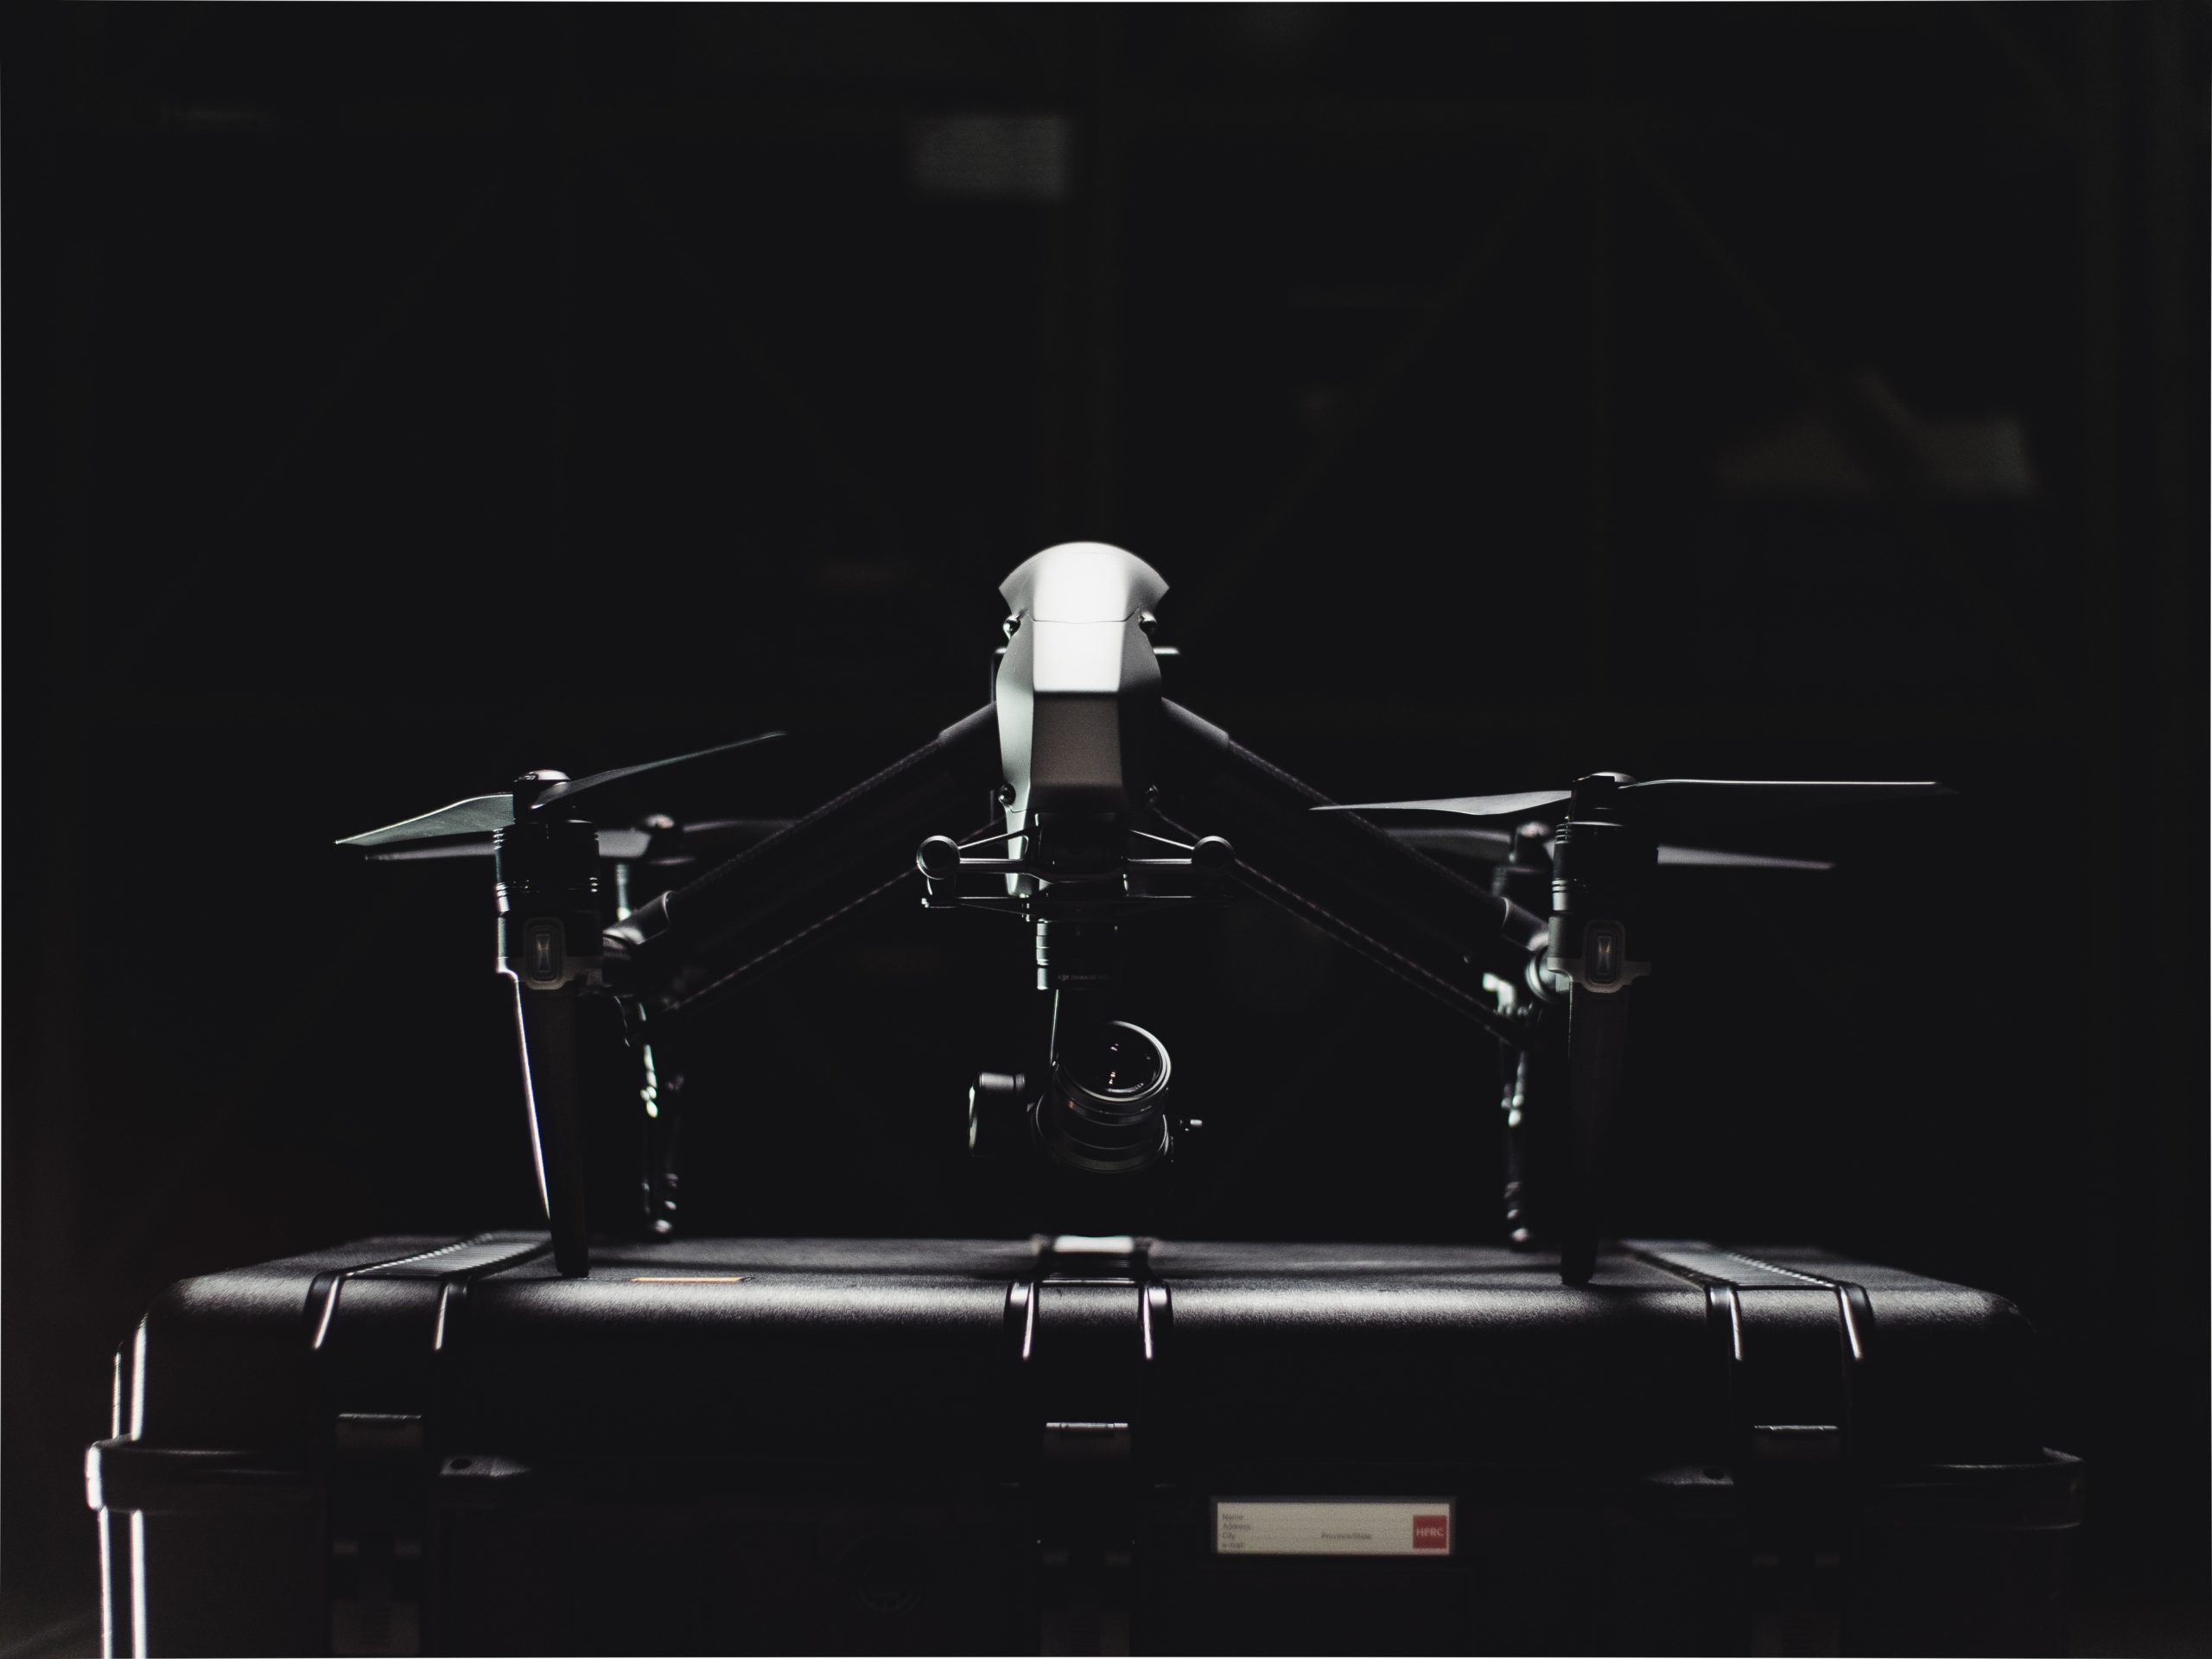 black-and-white-photo-of-drone-2050718